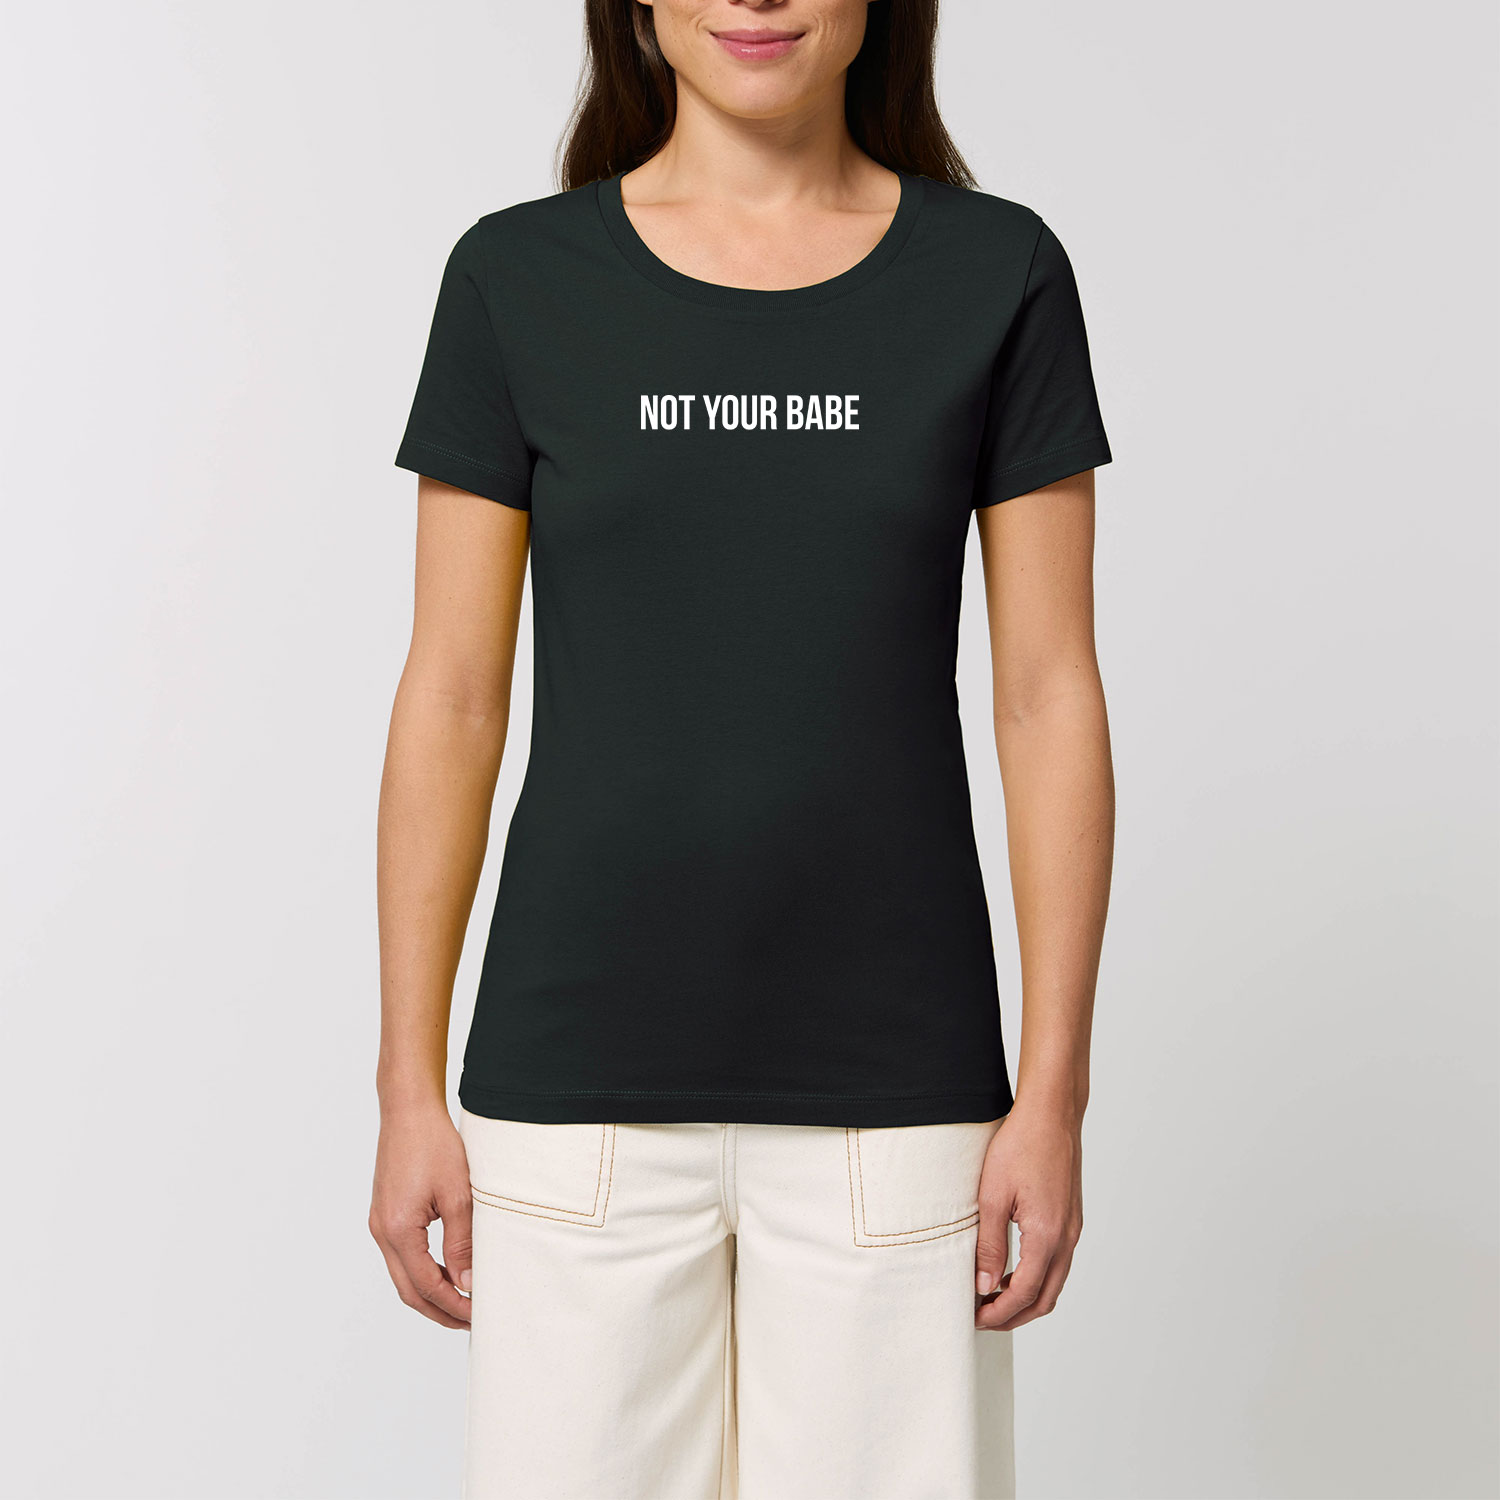 T-Shirt -  Not your babe